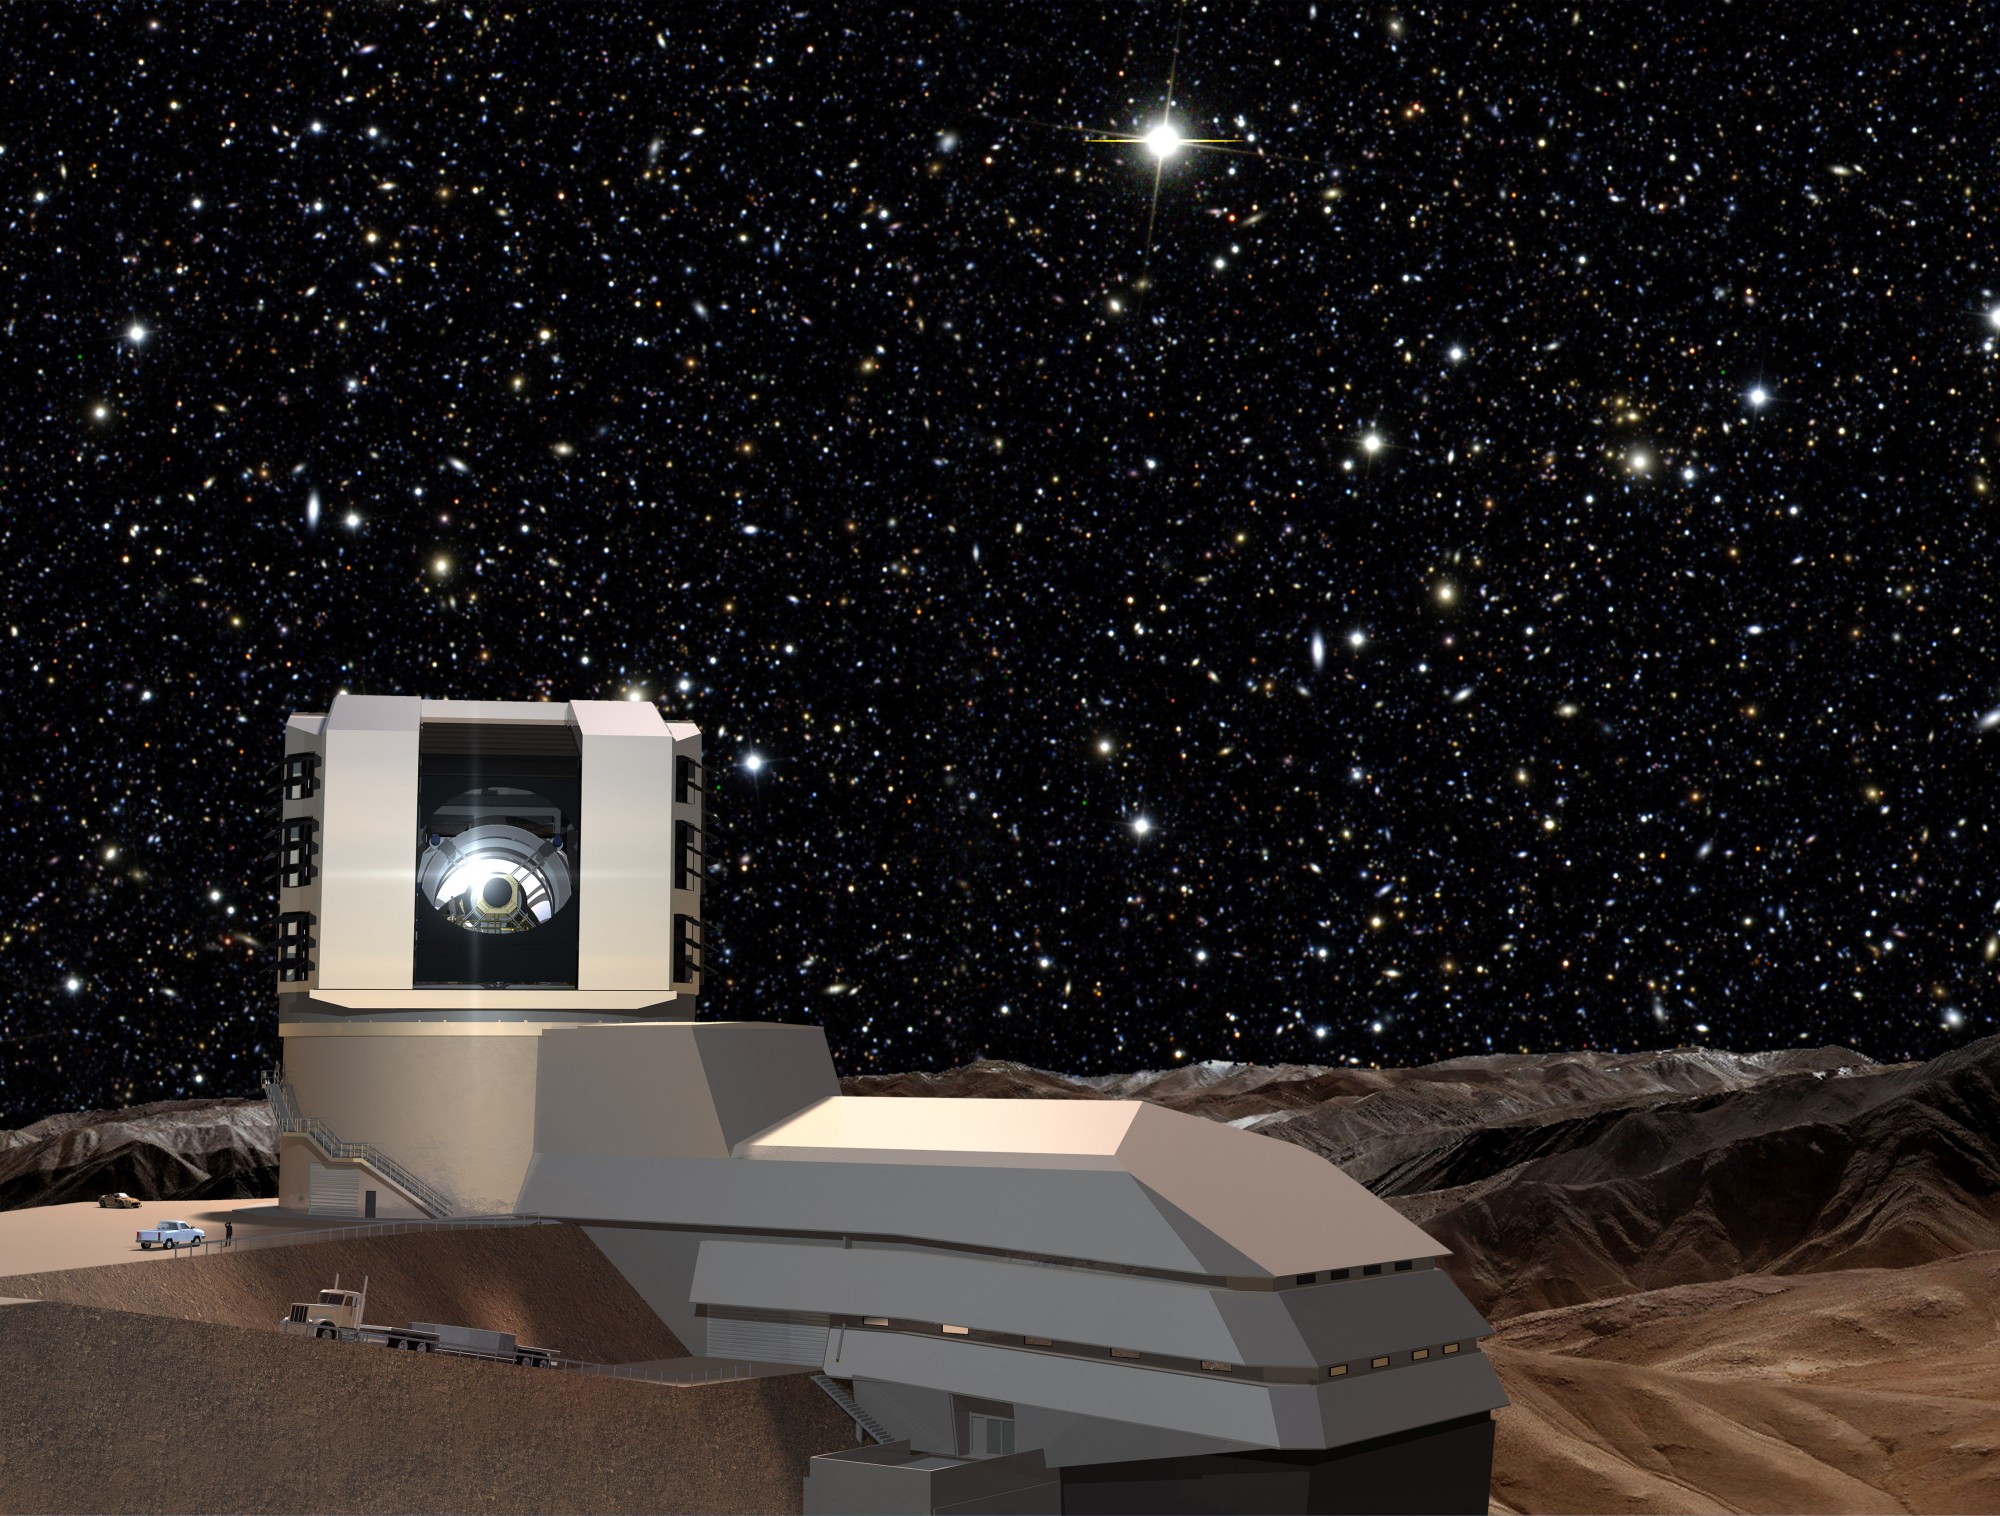 ﻿﻿An artist's impression of the LSST facility on Cerro Pachon in Chile. (Credit: LSST)